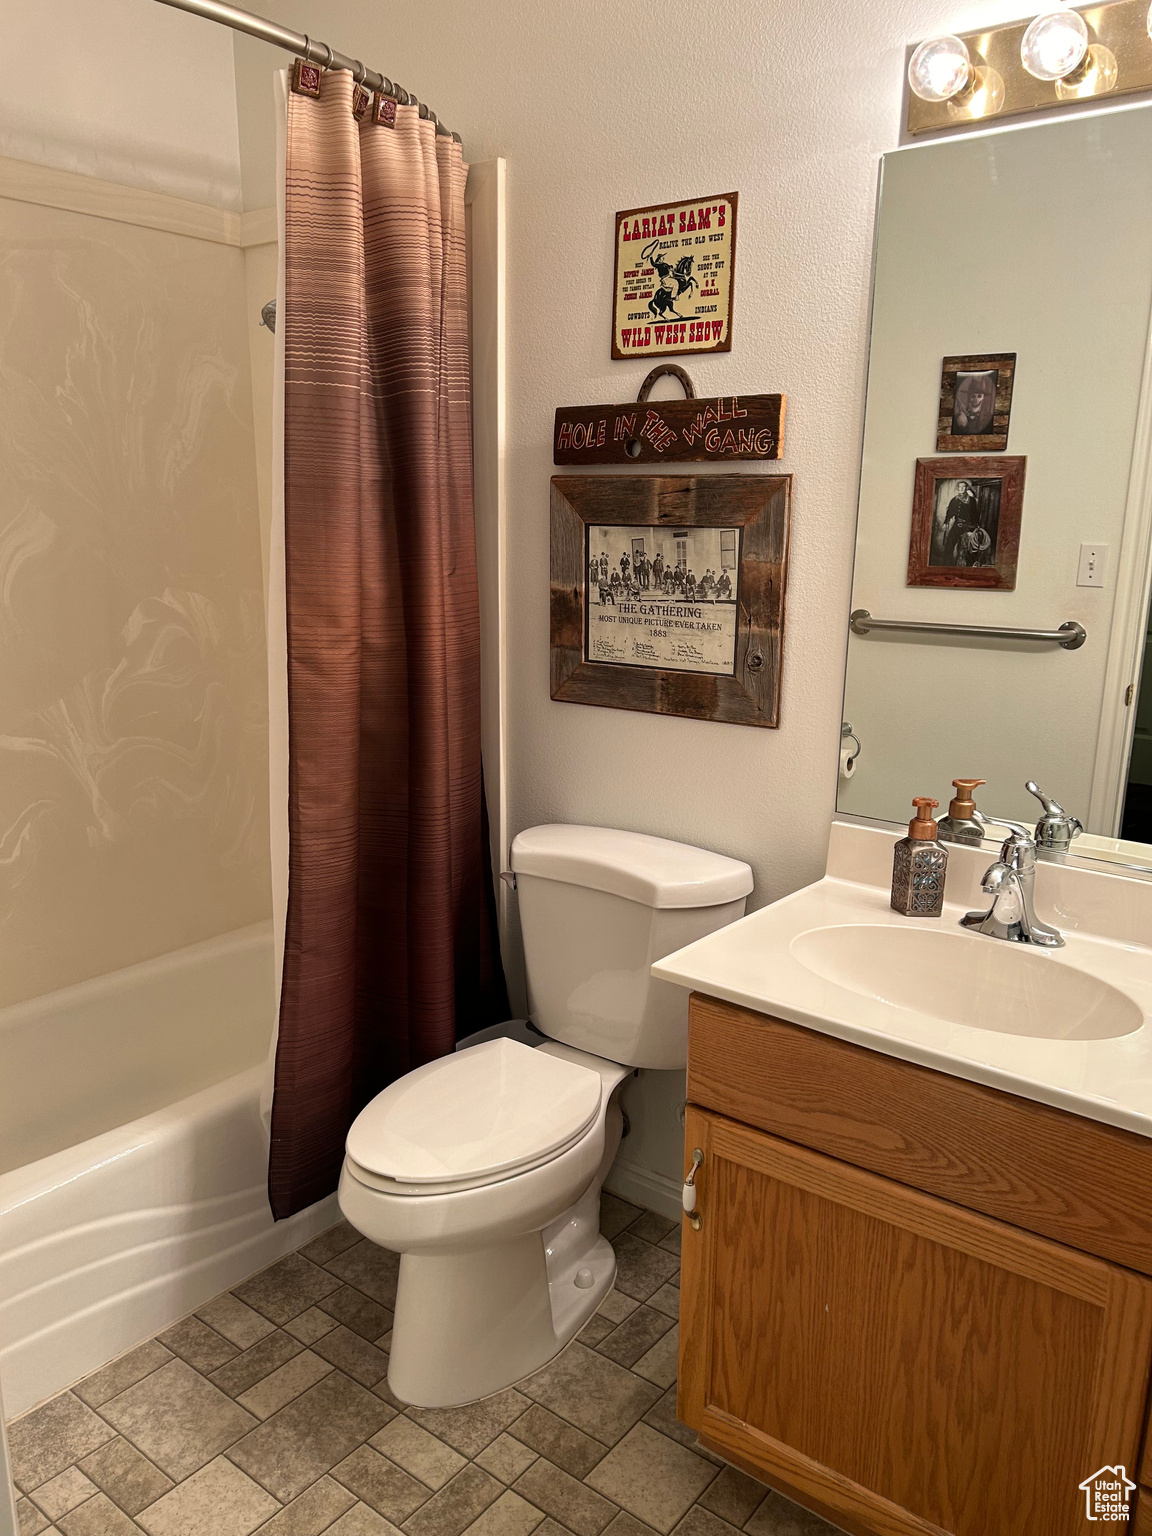 Full bathroom with shower / tub combo with curtain, large vanity, tile floors, and toilet